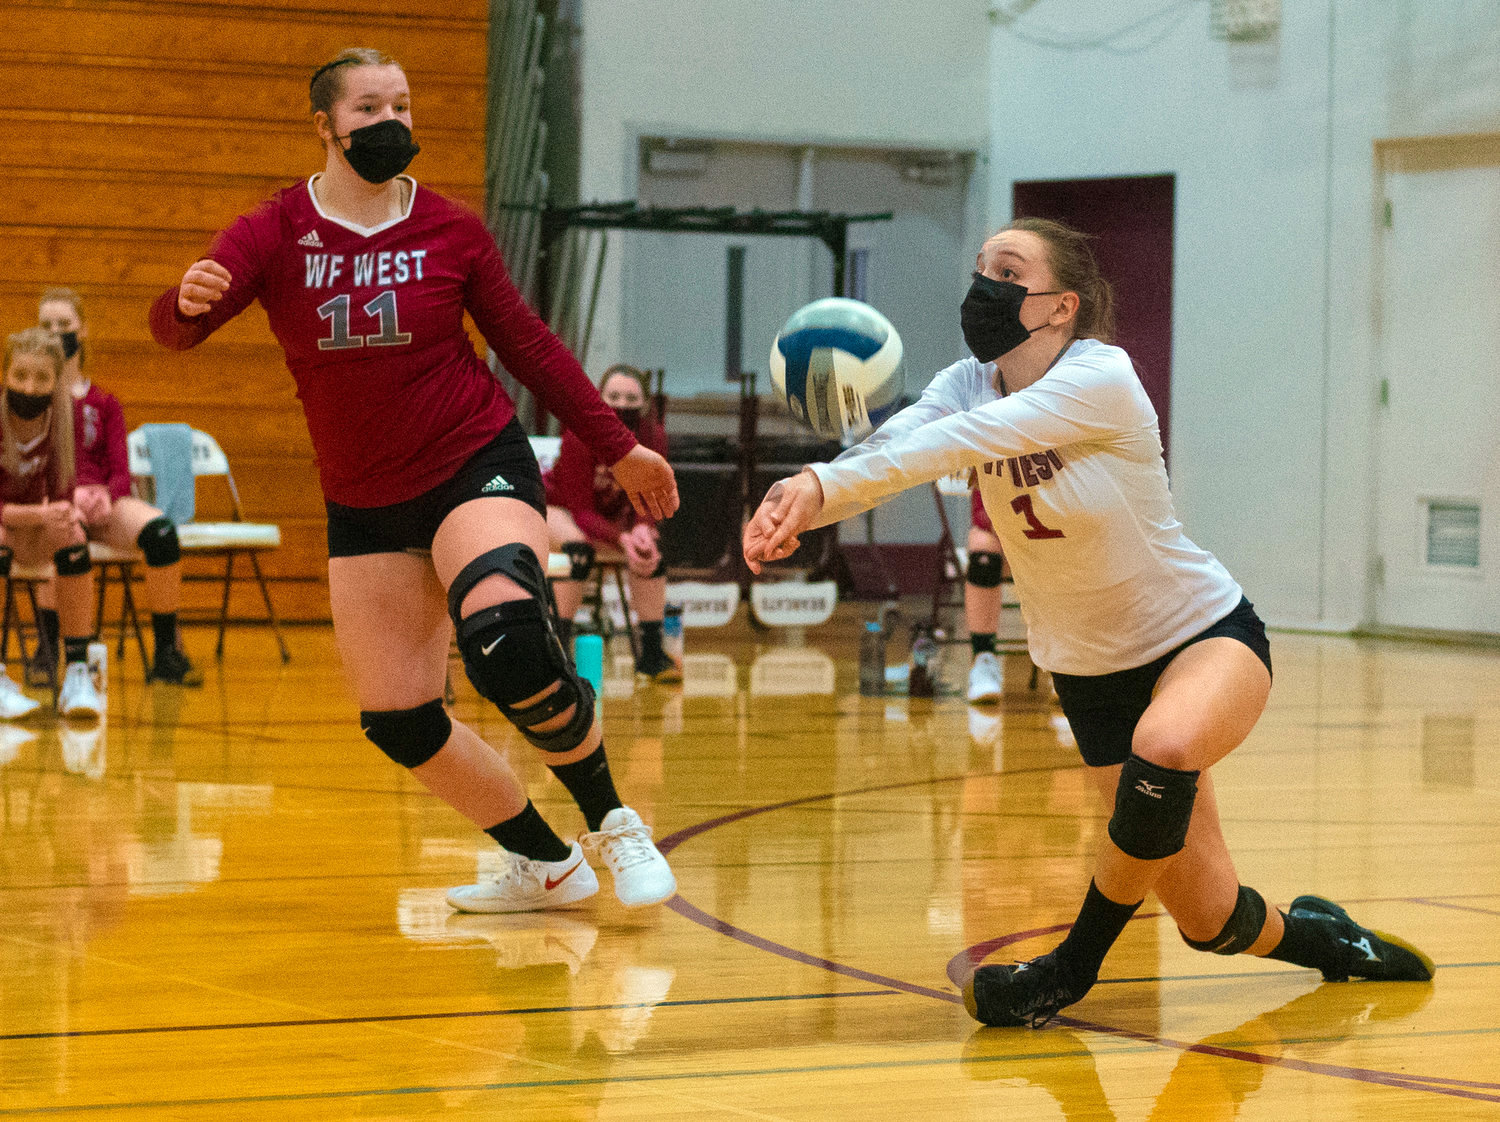 W.F. West sophomore setter Savannah Hawkins (11) was named to the all-league second team, and senior libero Alisha Anderson (1) was named to the all-league first team.